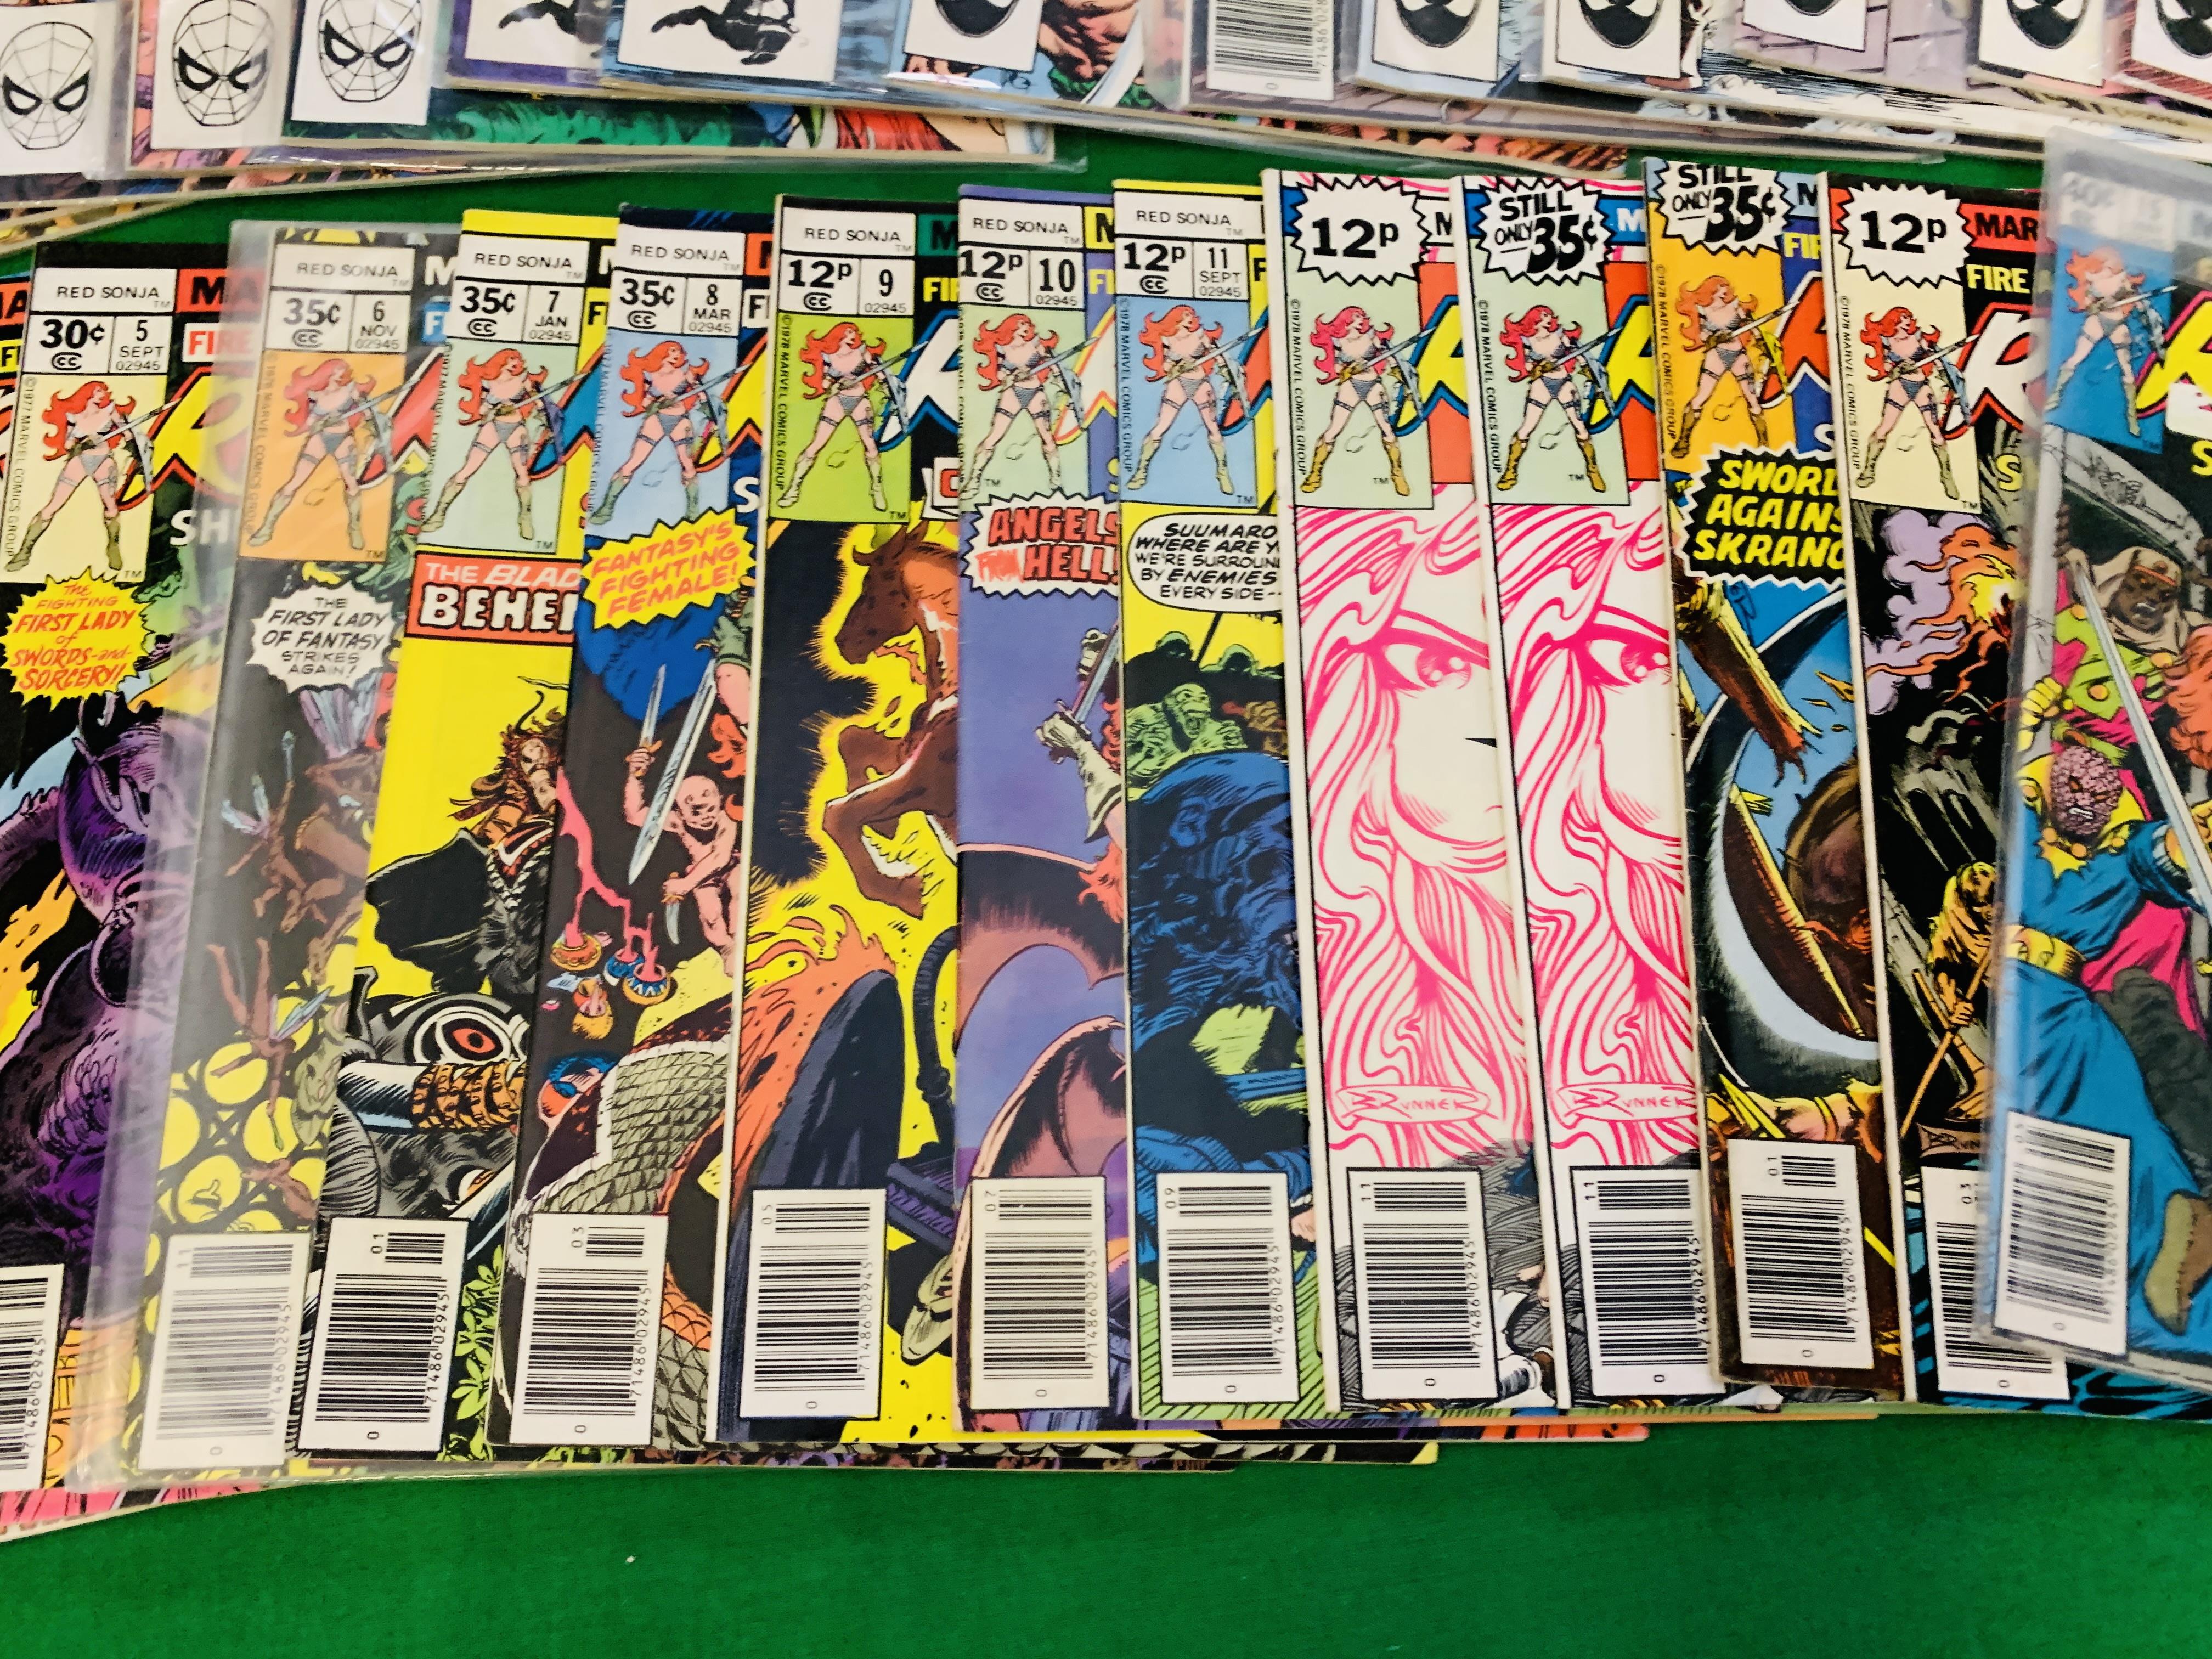 MARVEL COMICS RED SONJA NO. 1 - 15 FROM 1977 AND NO. 1 - 13 FROM 1983, INCLUDING OTHER APPEARANCES. - Image 3 of 8